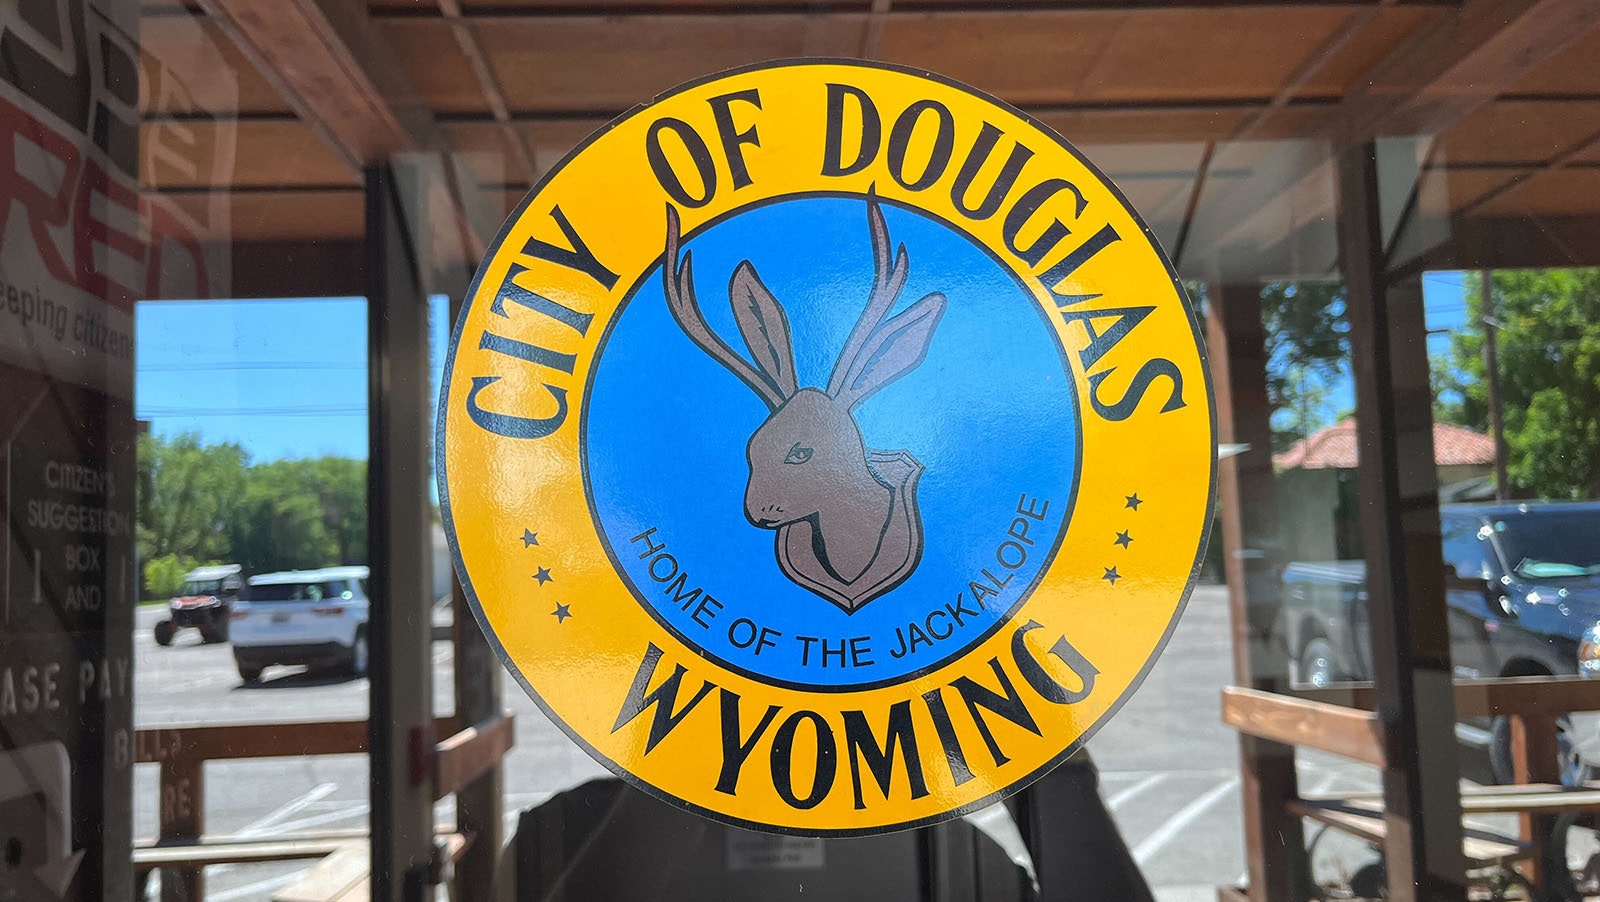 The jackalope is the official symbol of Douglas, Wyoming.